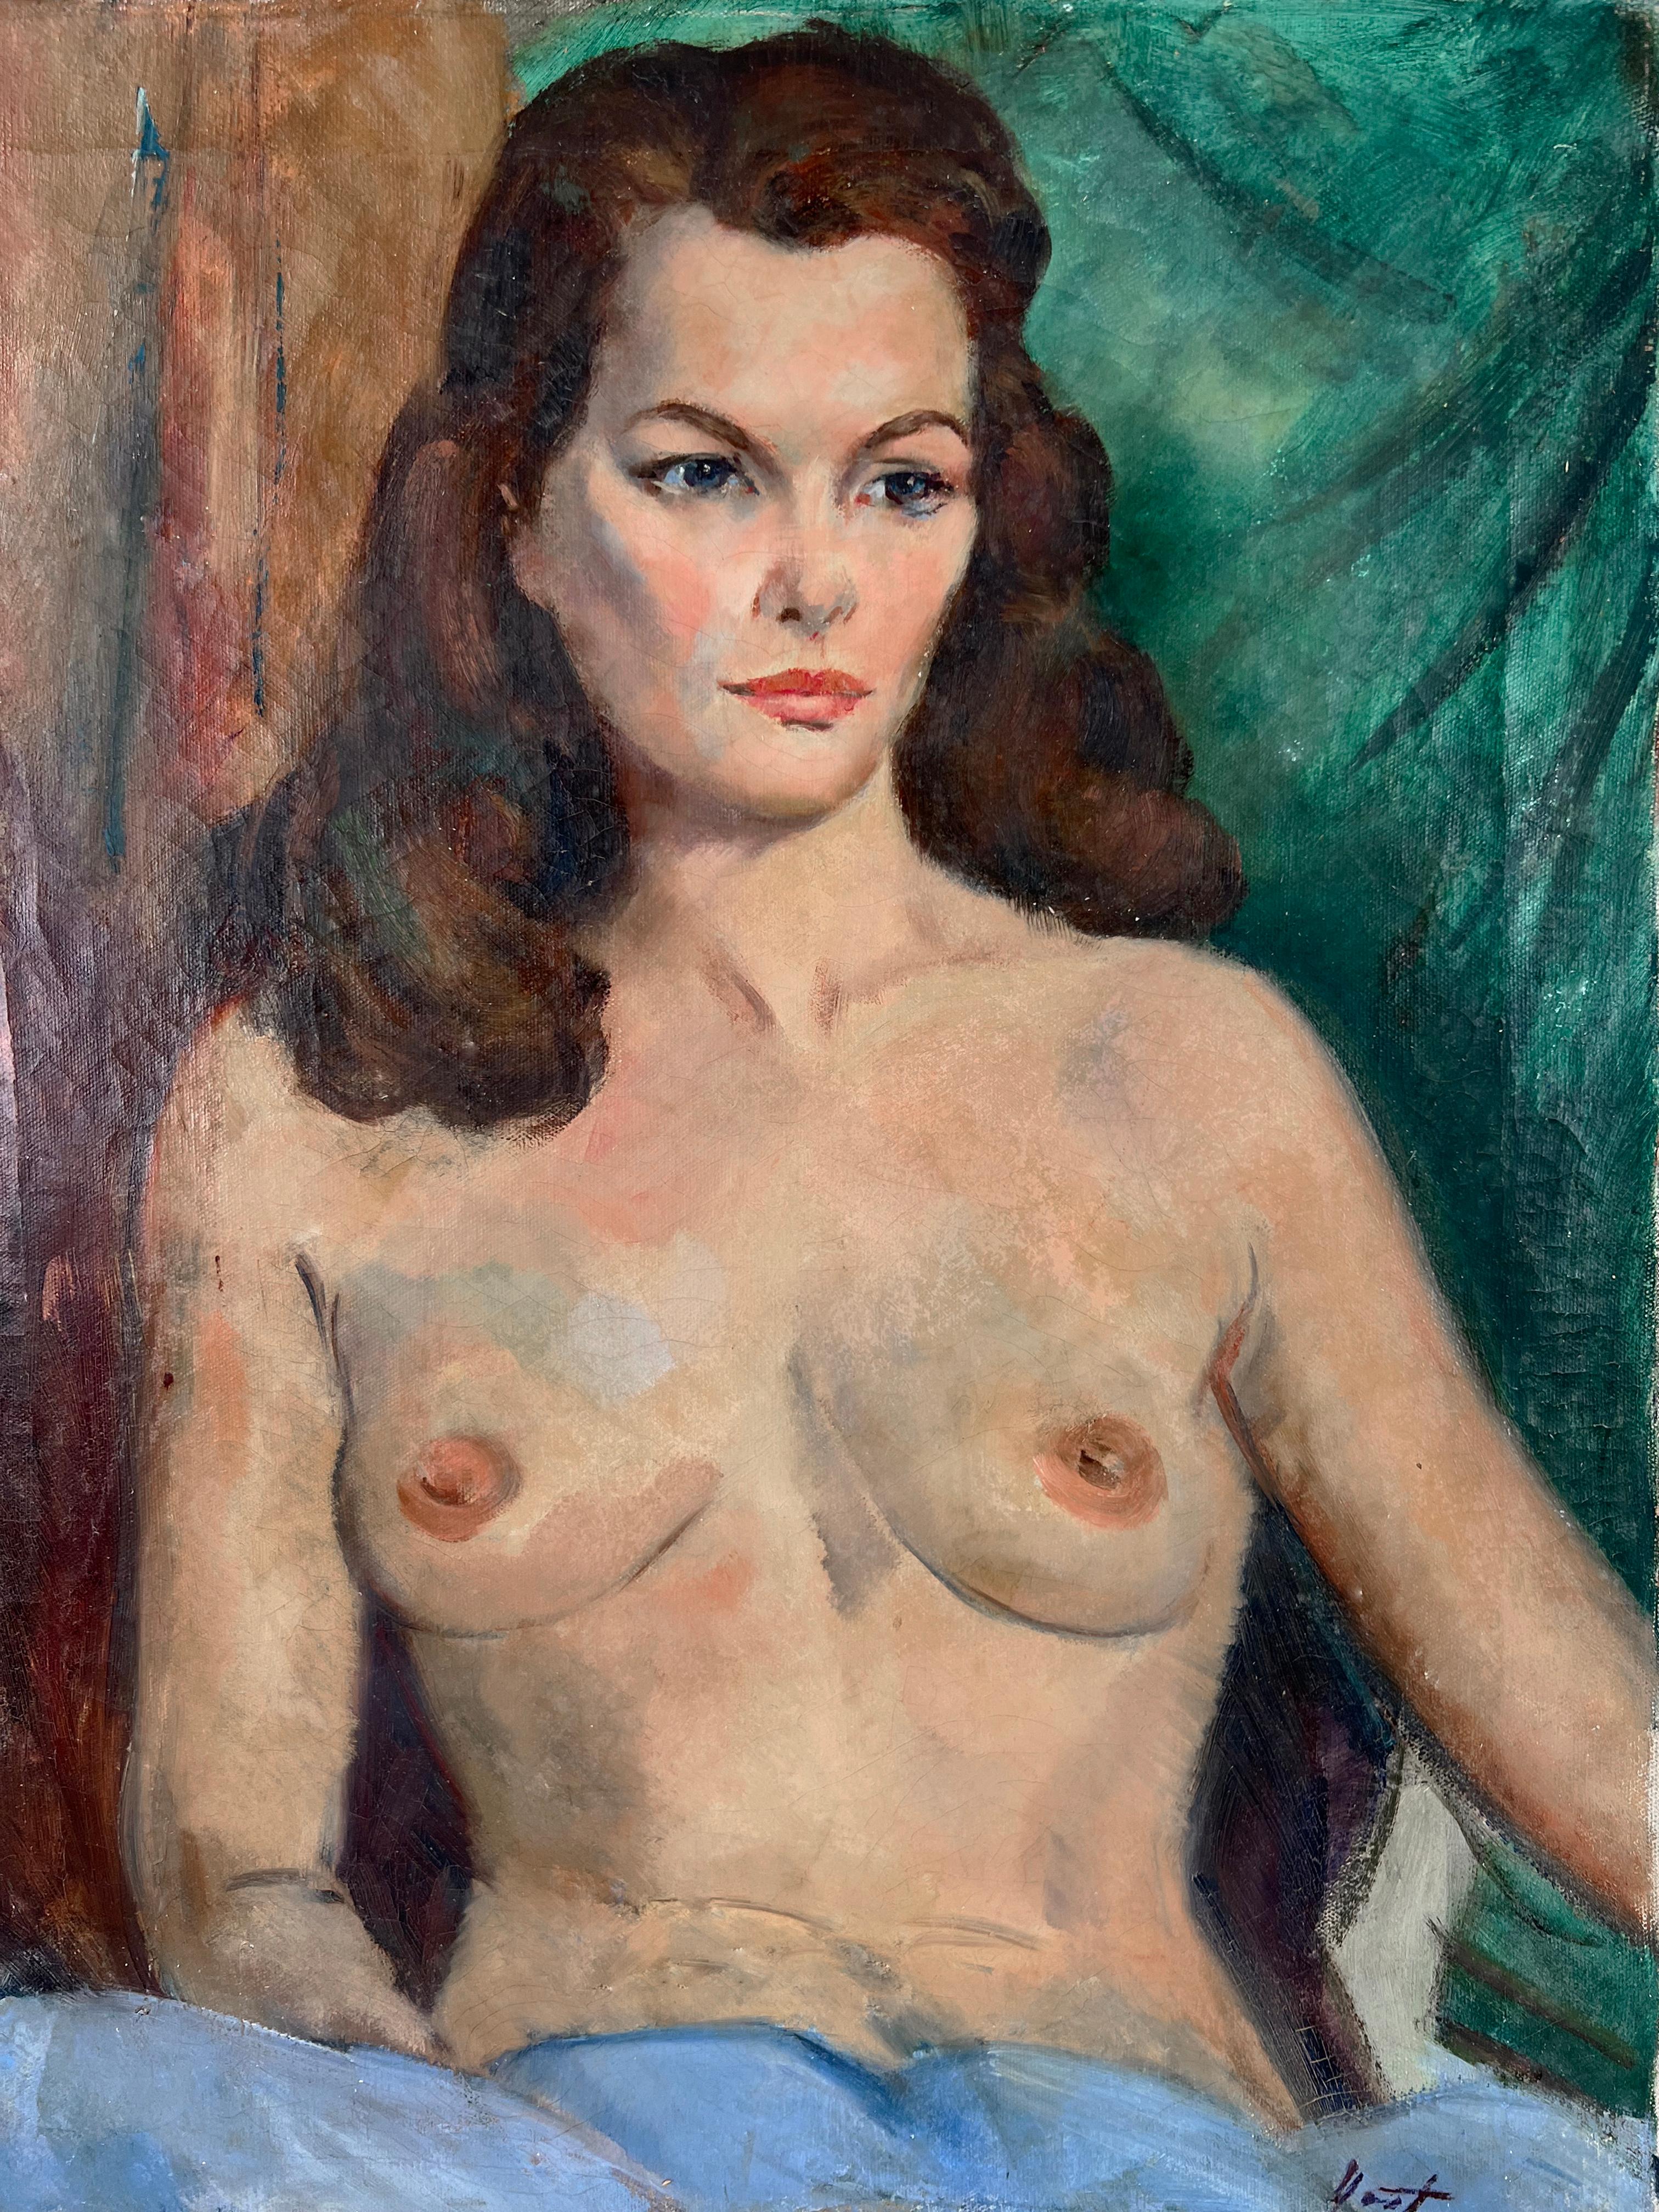 Seated Nude Woman American Impressionist School 1940s by Fred Yost  - Painting by Frederick Yost